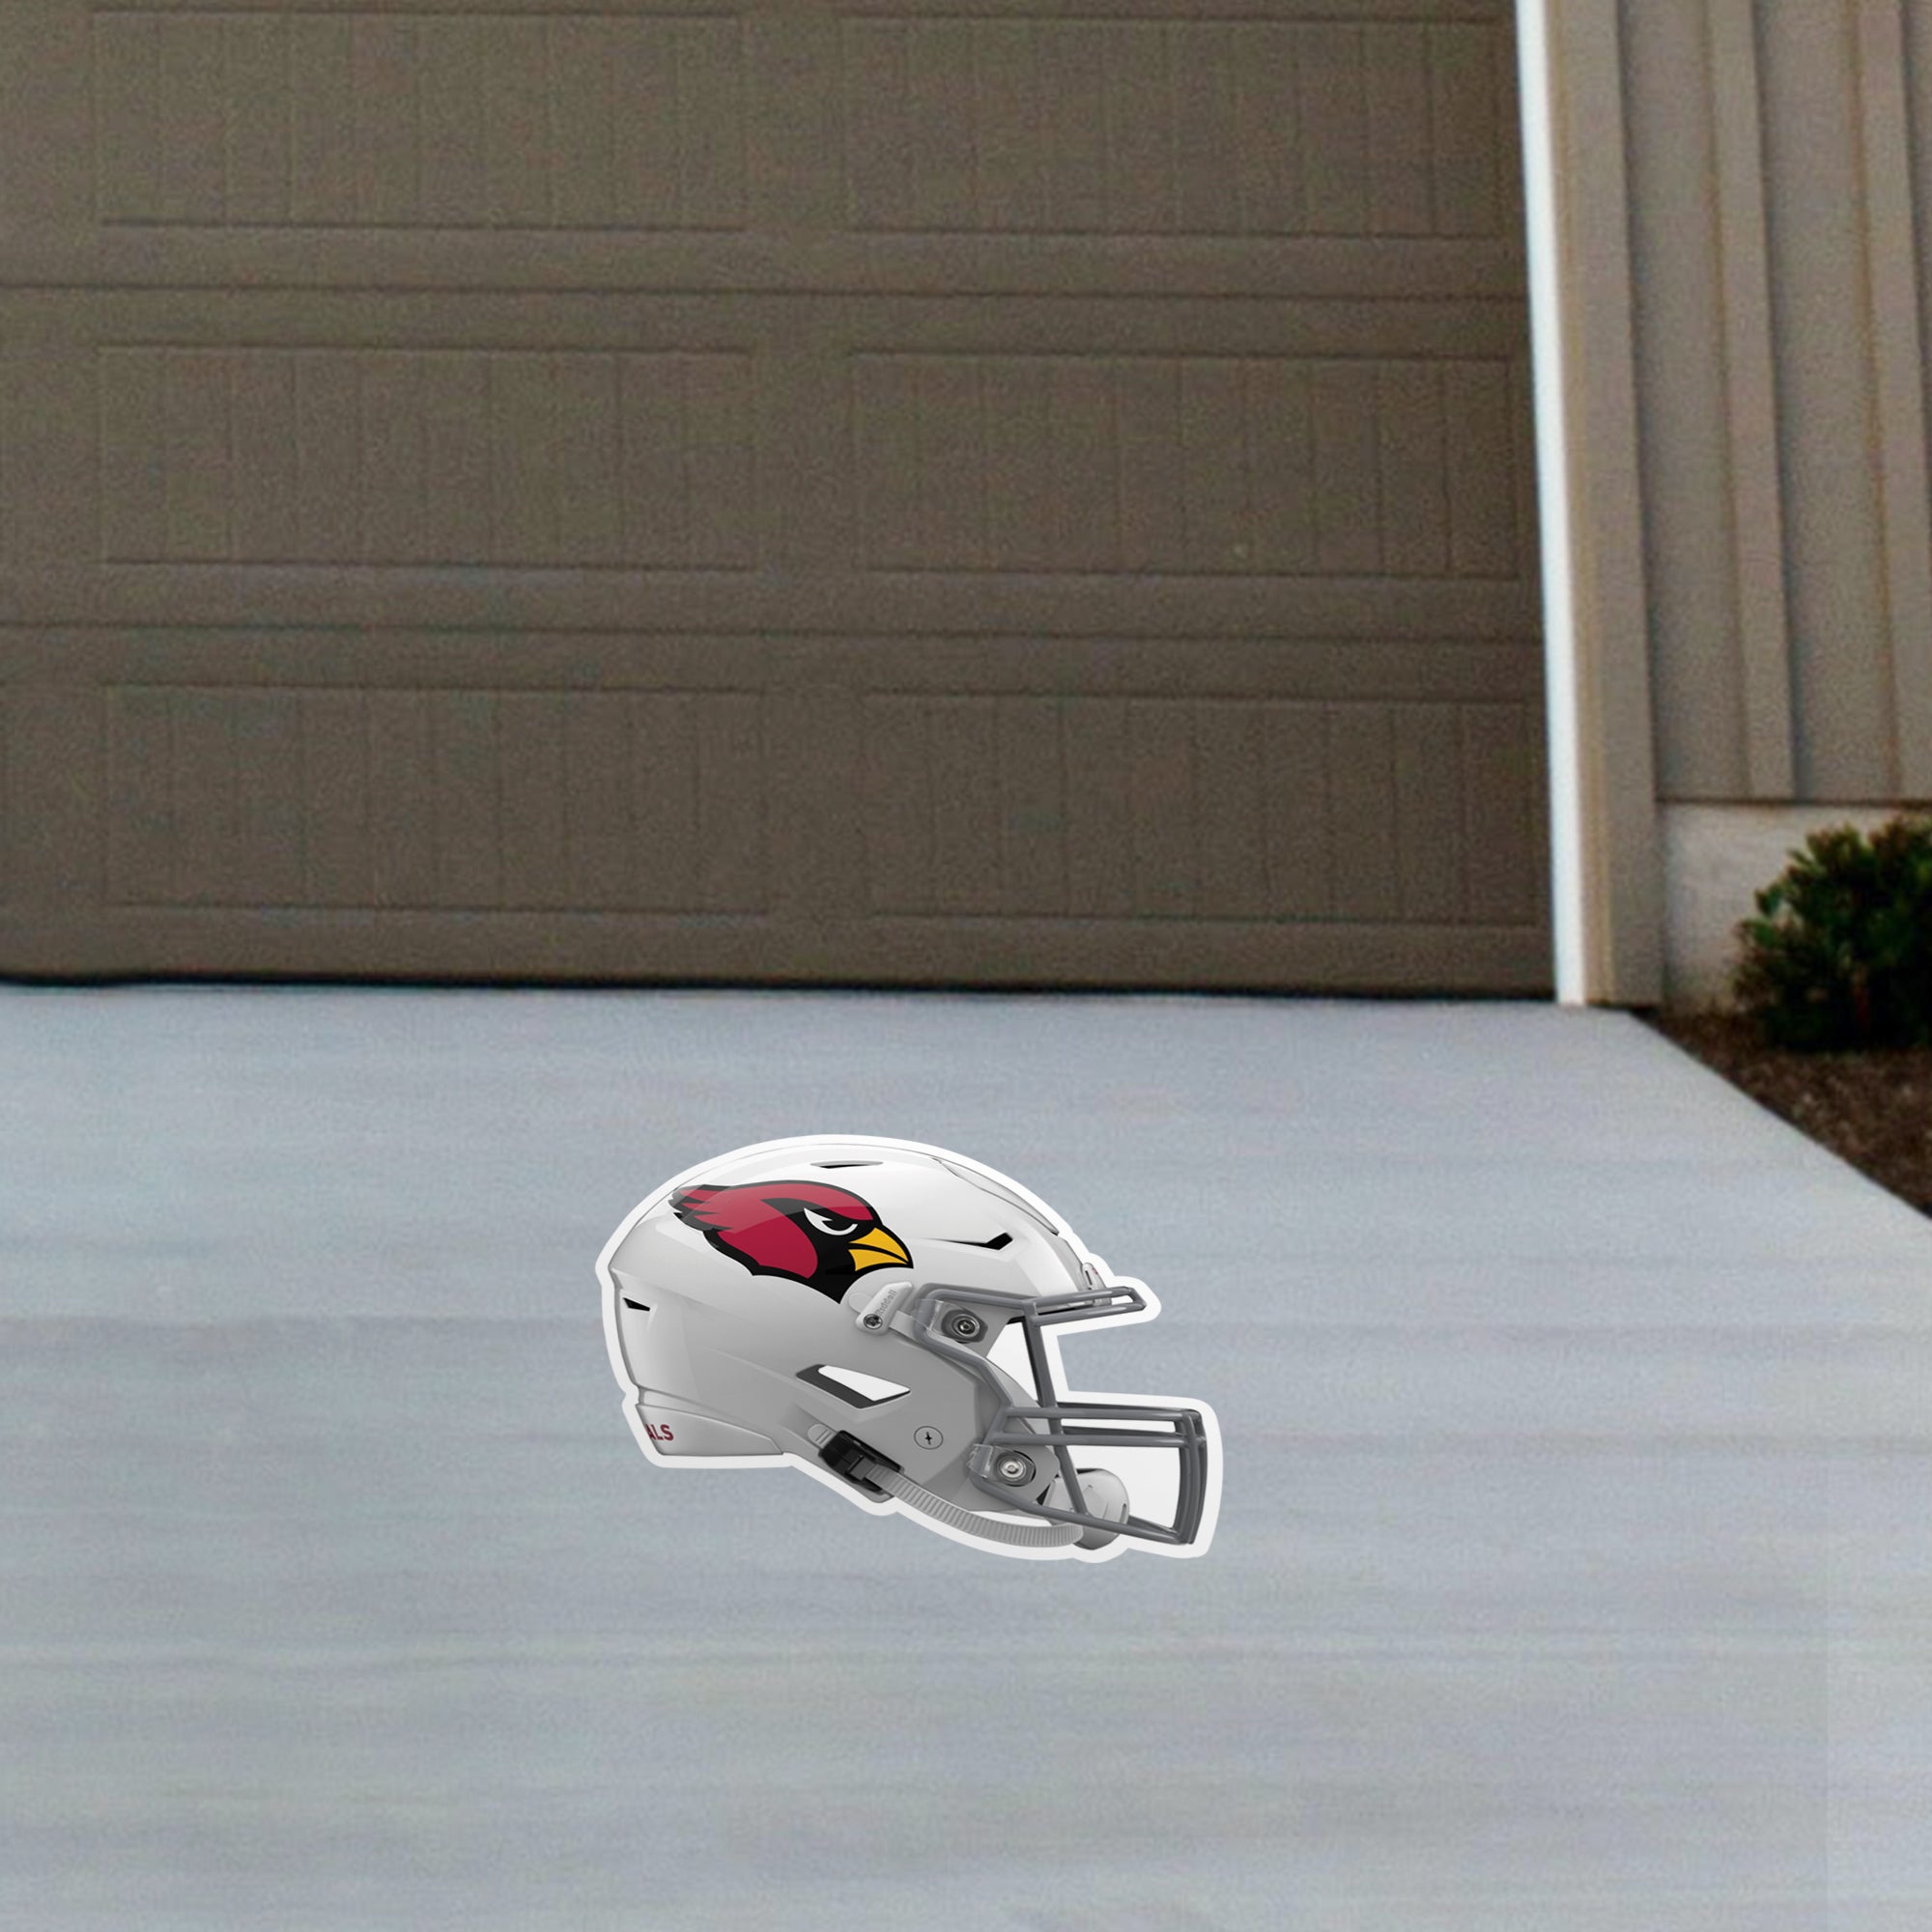 Arizona Cardinals: 2022 Helmet - Officially Licensed NFL Removable Adh